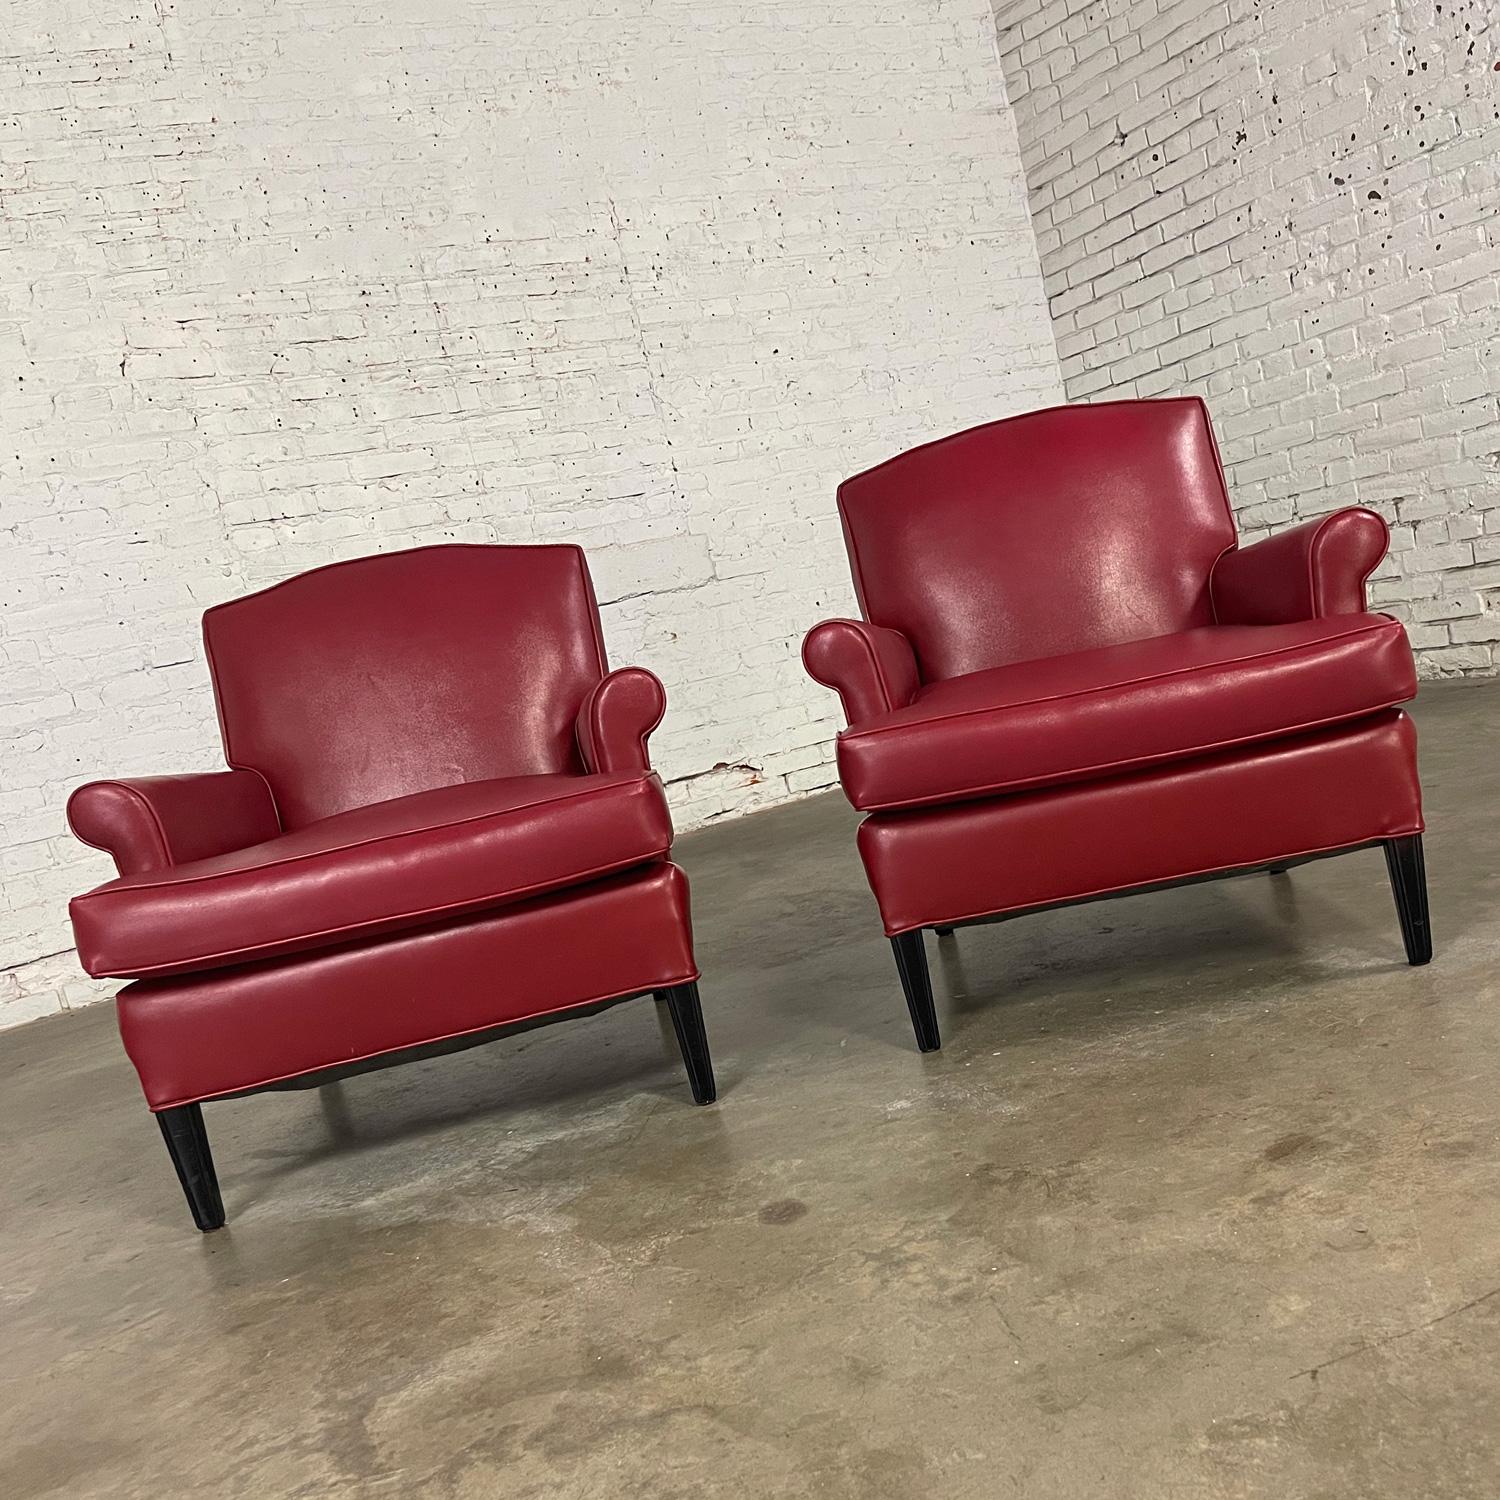 1940’s Traditional Club Chairs Original Red Faux Leather & Wood Legs a Pair For Sale 2